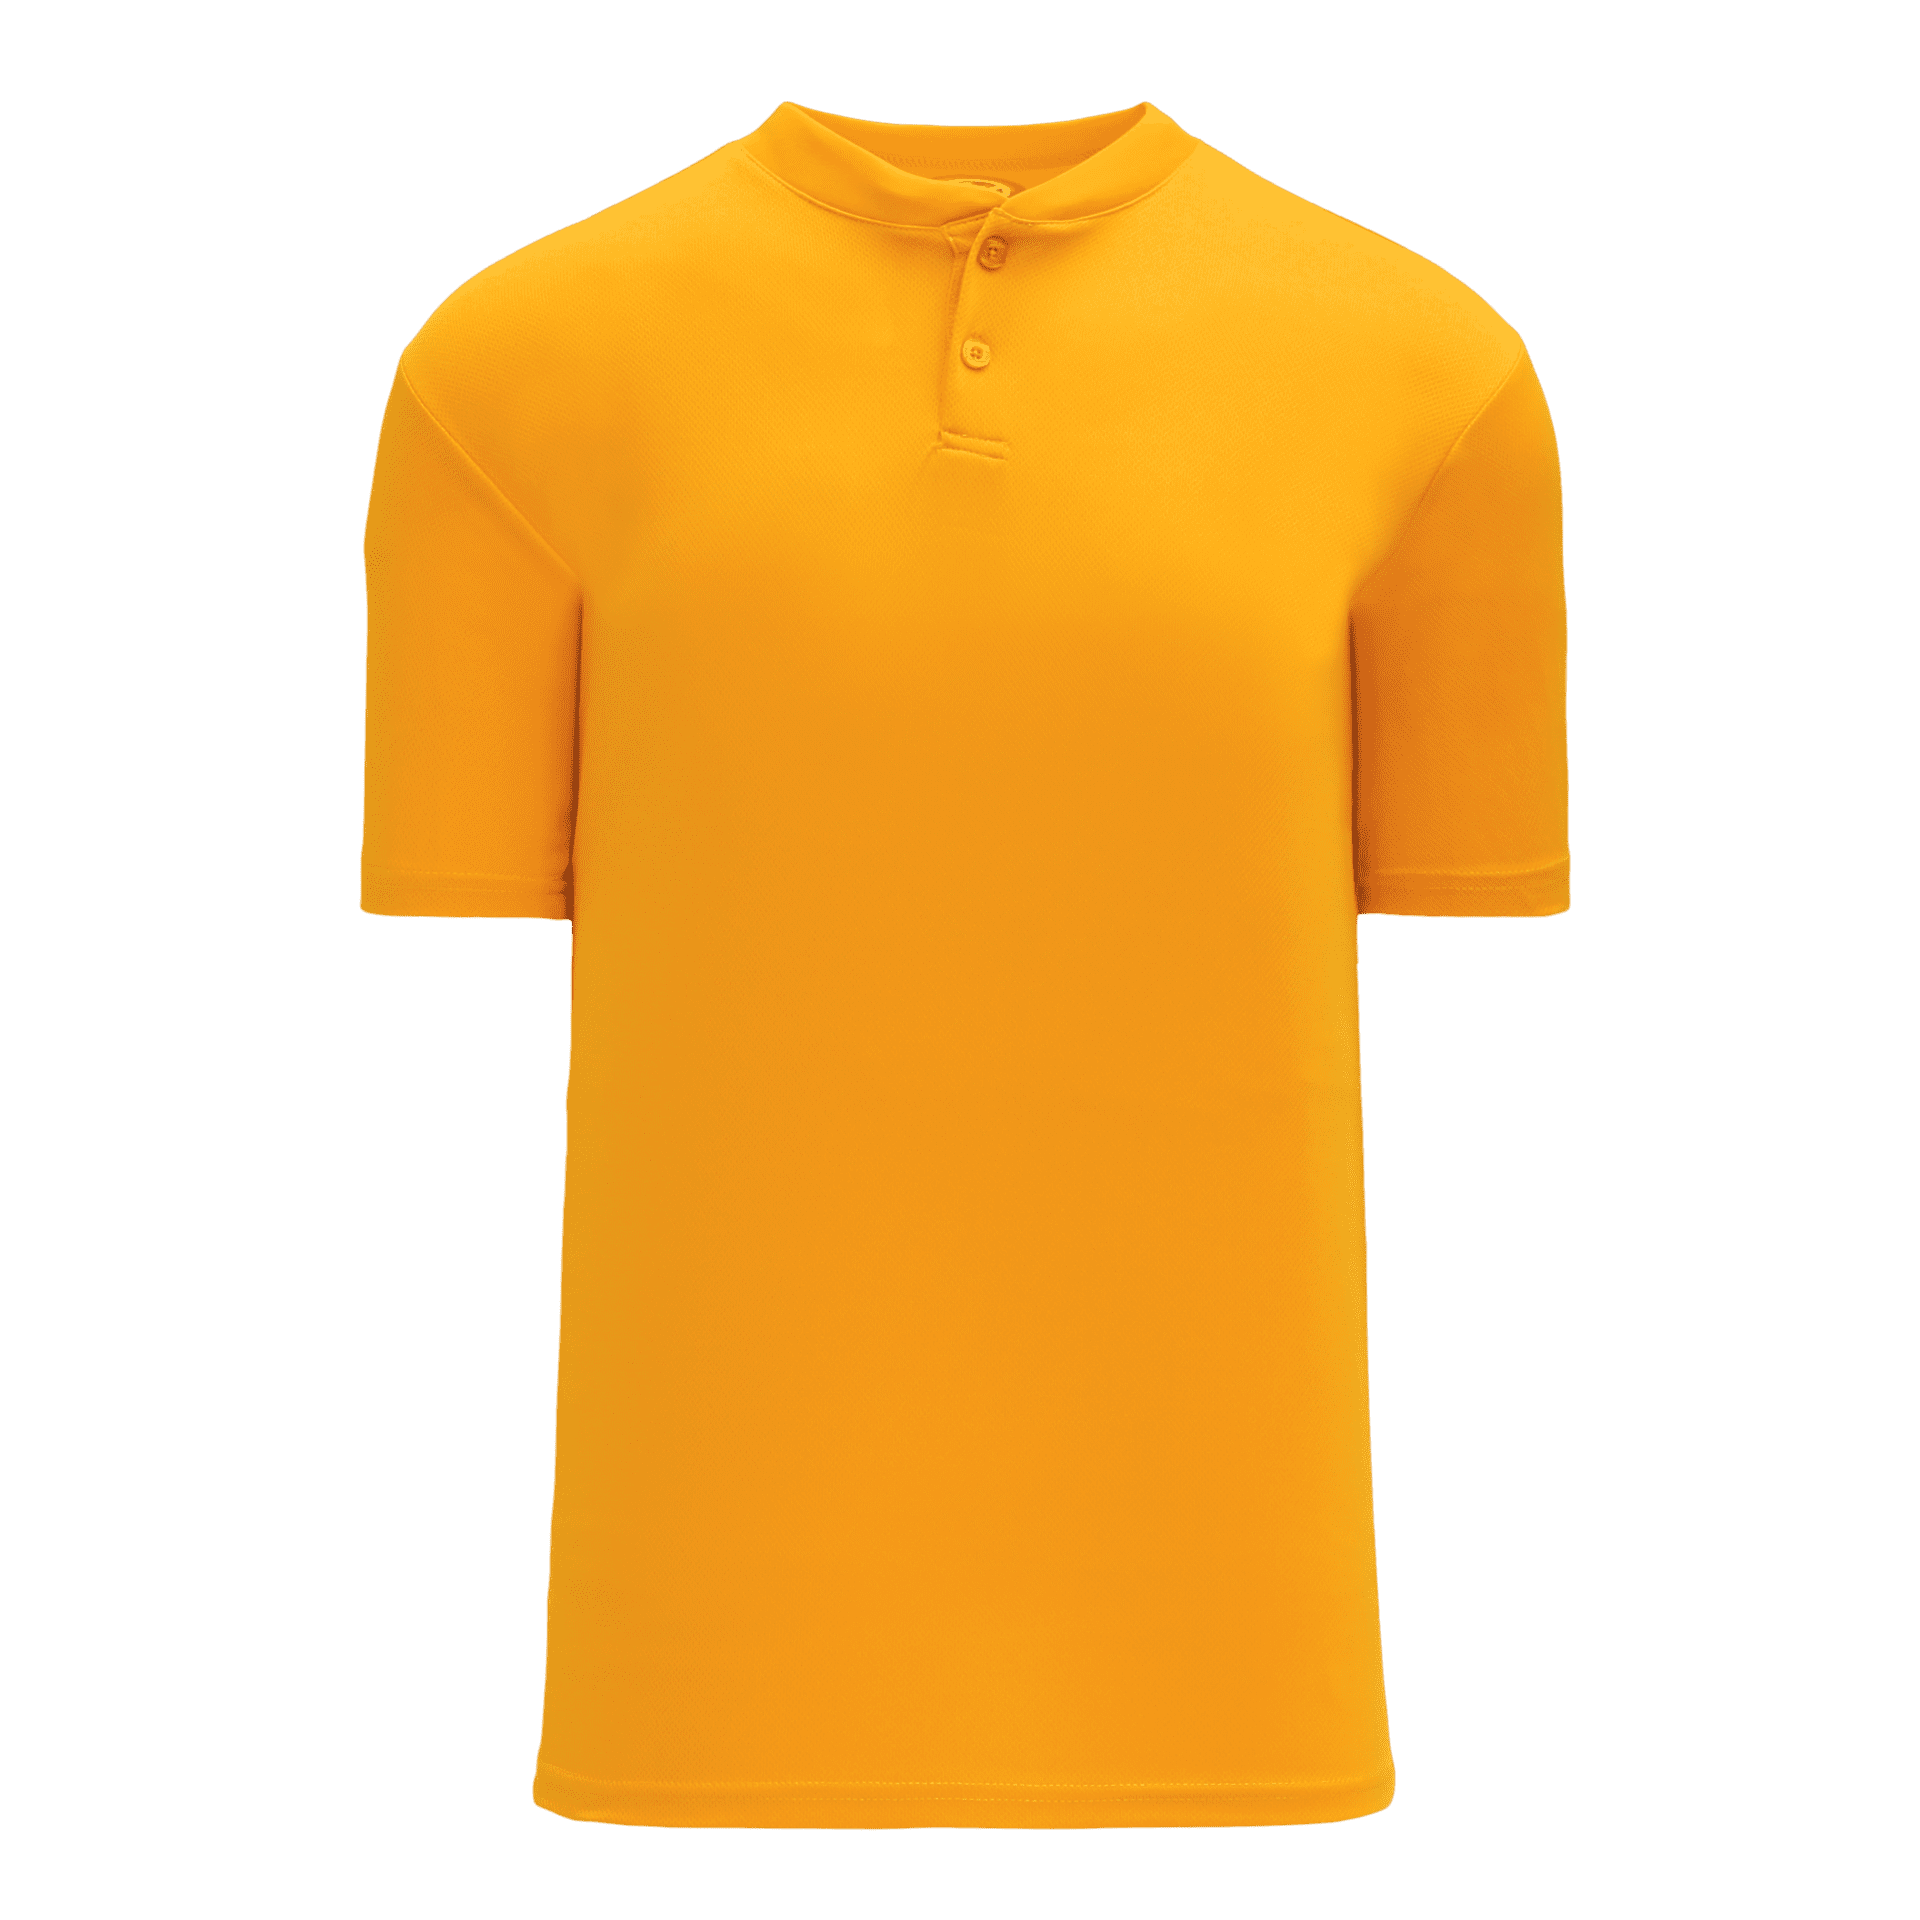 ATHLETIC KNIT TWO BUTTON BASEBALL JERSEY #BA1347 Gold